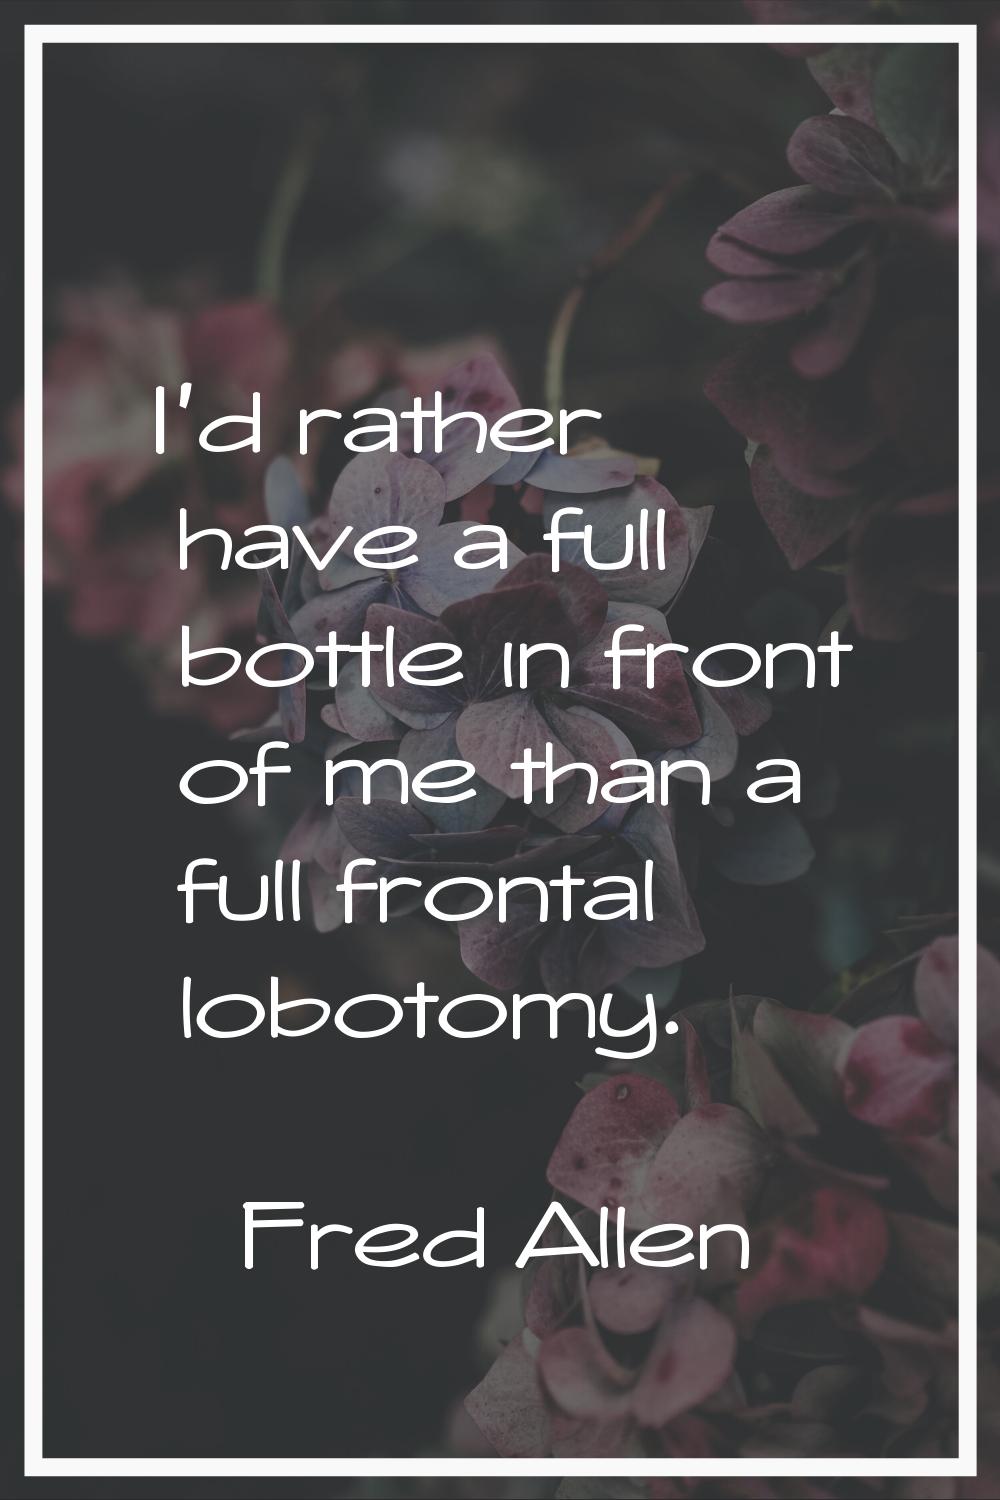 I'd rather have a full bottle in front of me than a full frontal lobotomy.